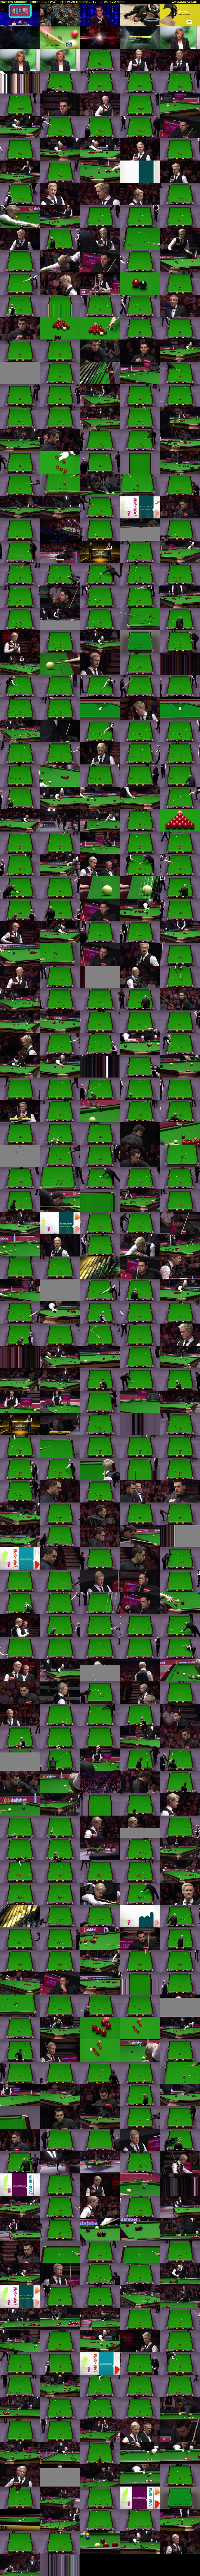 Masters Snooker - Extra (BBC TWO) Friday 20 January 2017 00:05 - 02:05